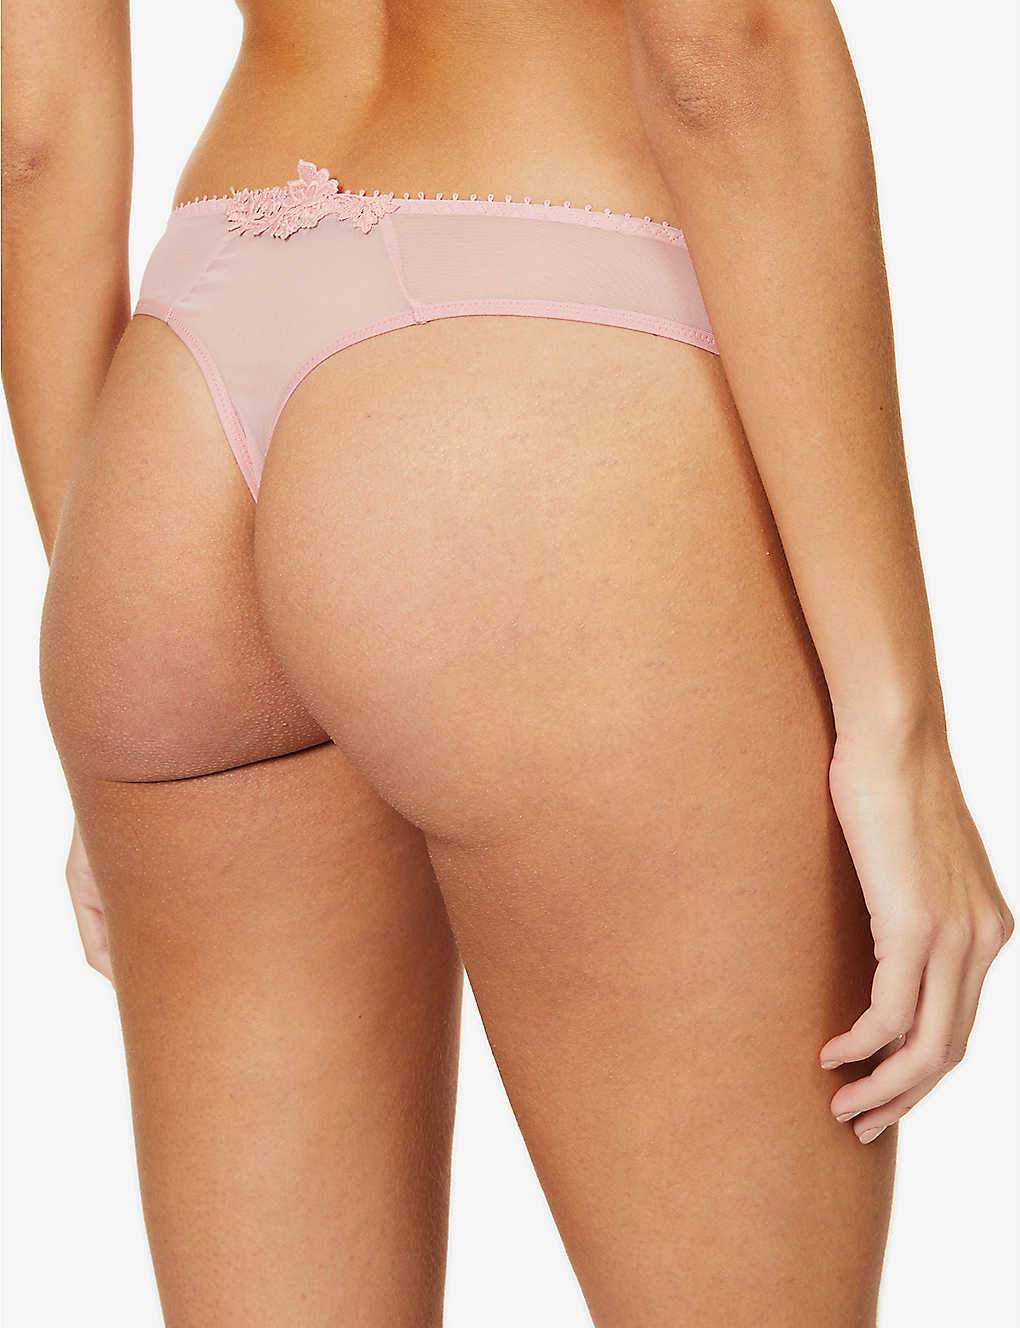 Passionata White Nights String - Style Number - - Thongs  Available at Illusions Lingerie